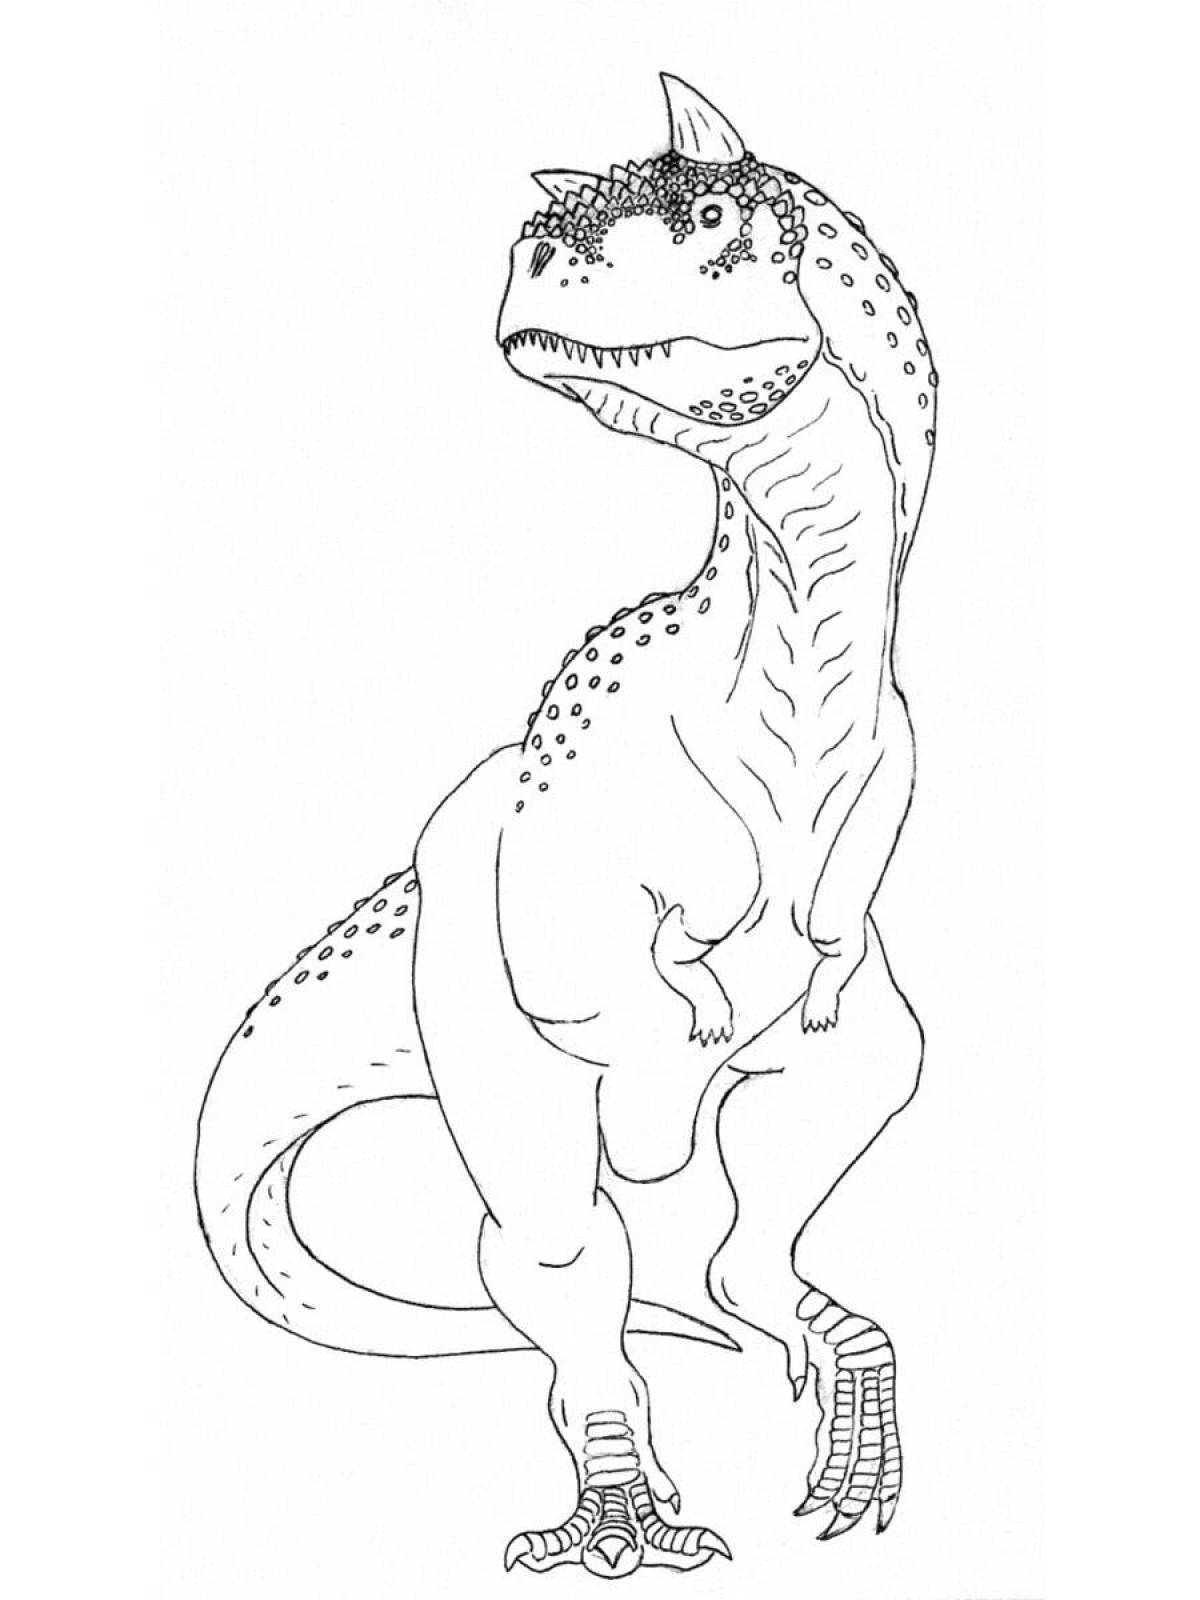 Coloring page magnificent carnotaurus